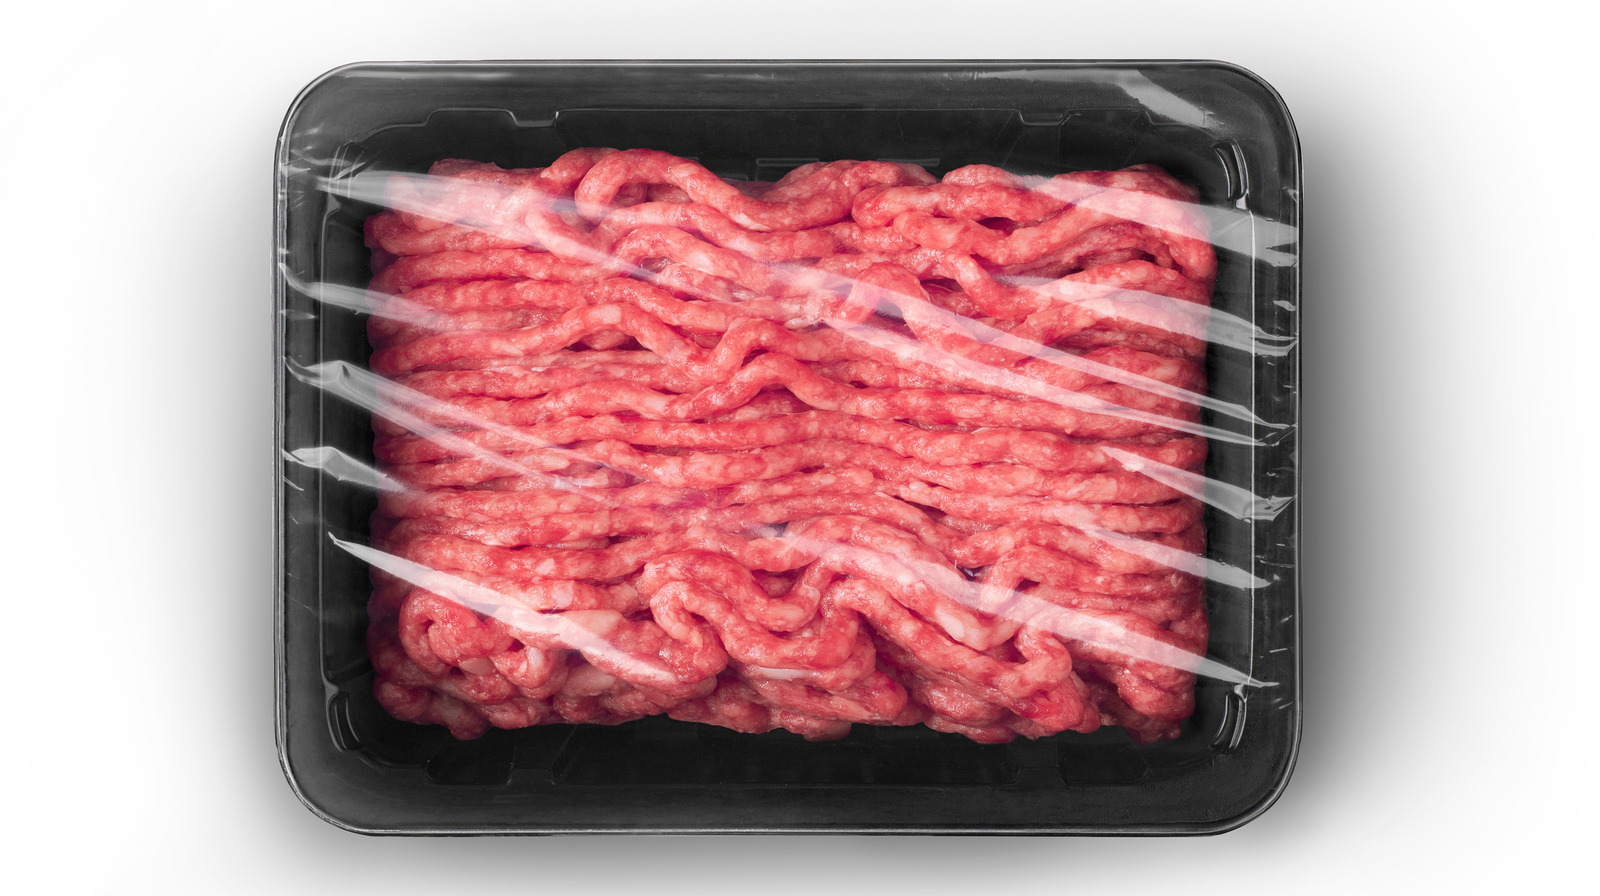 Over 120,000 Pounds Of Ground Beef Are Being Recalled. Here's Why